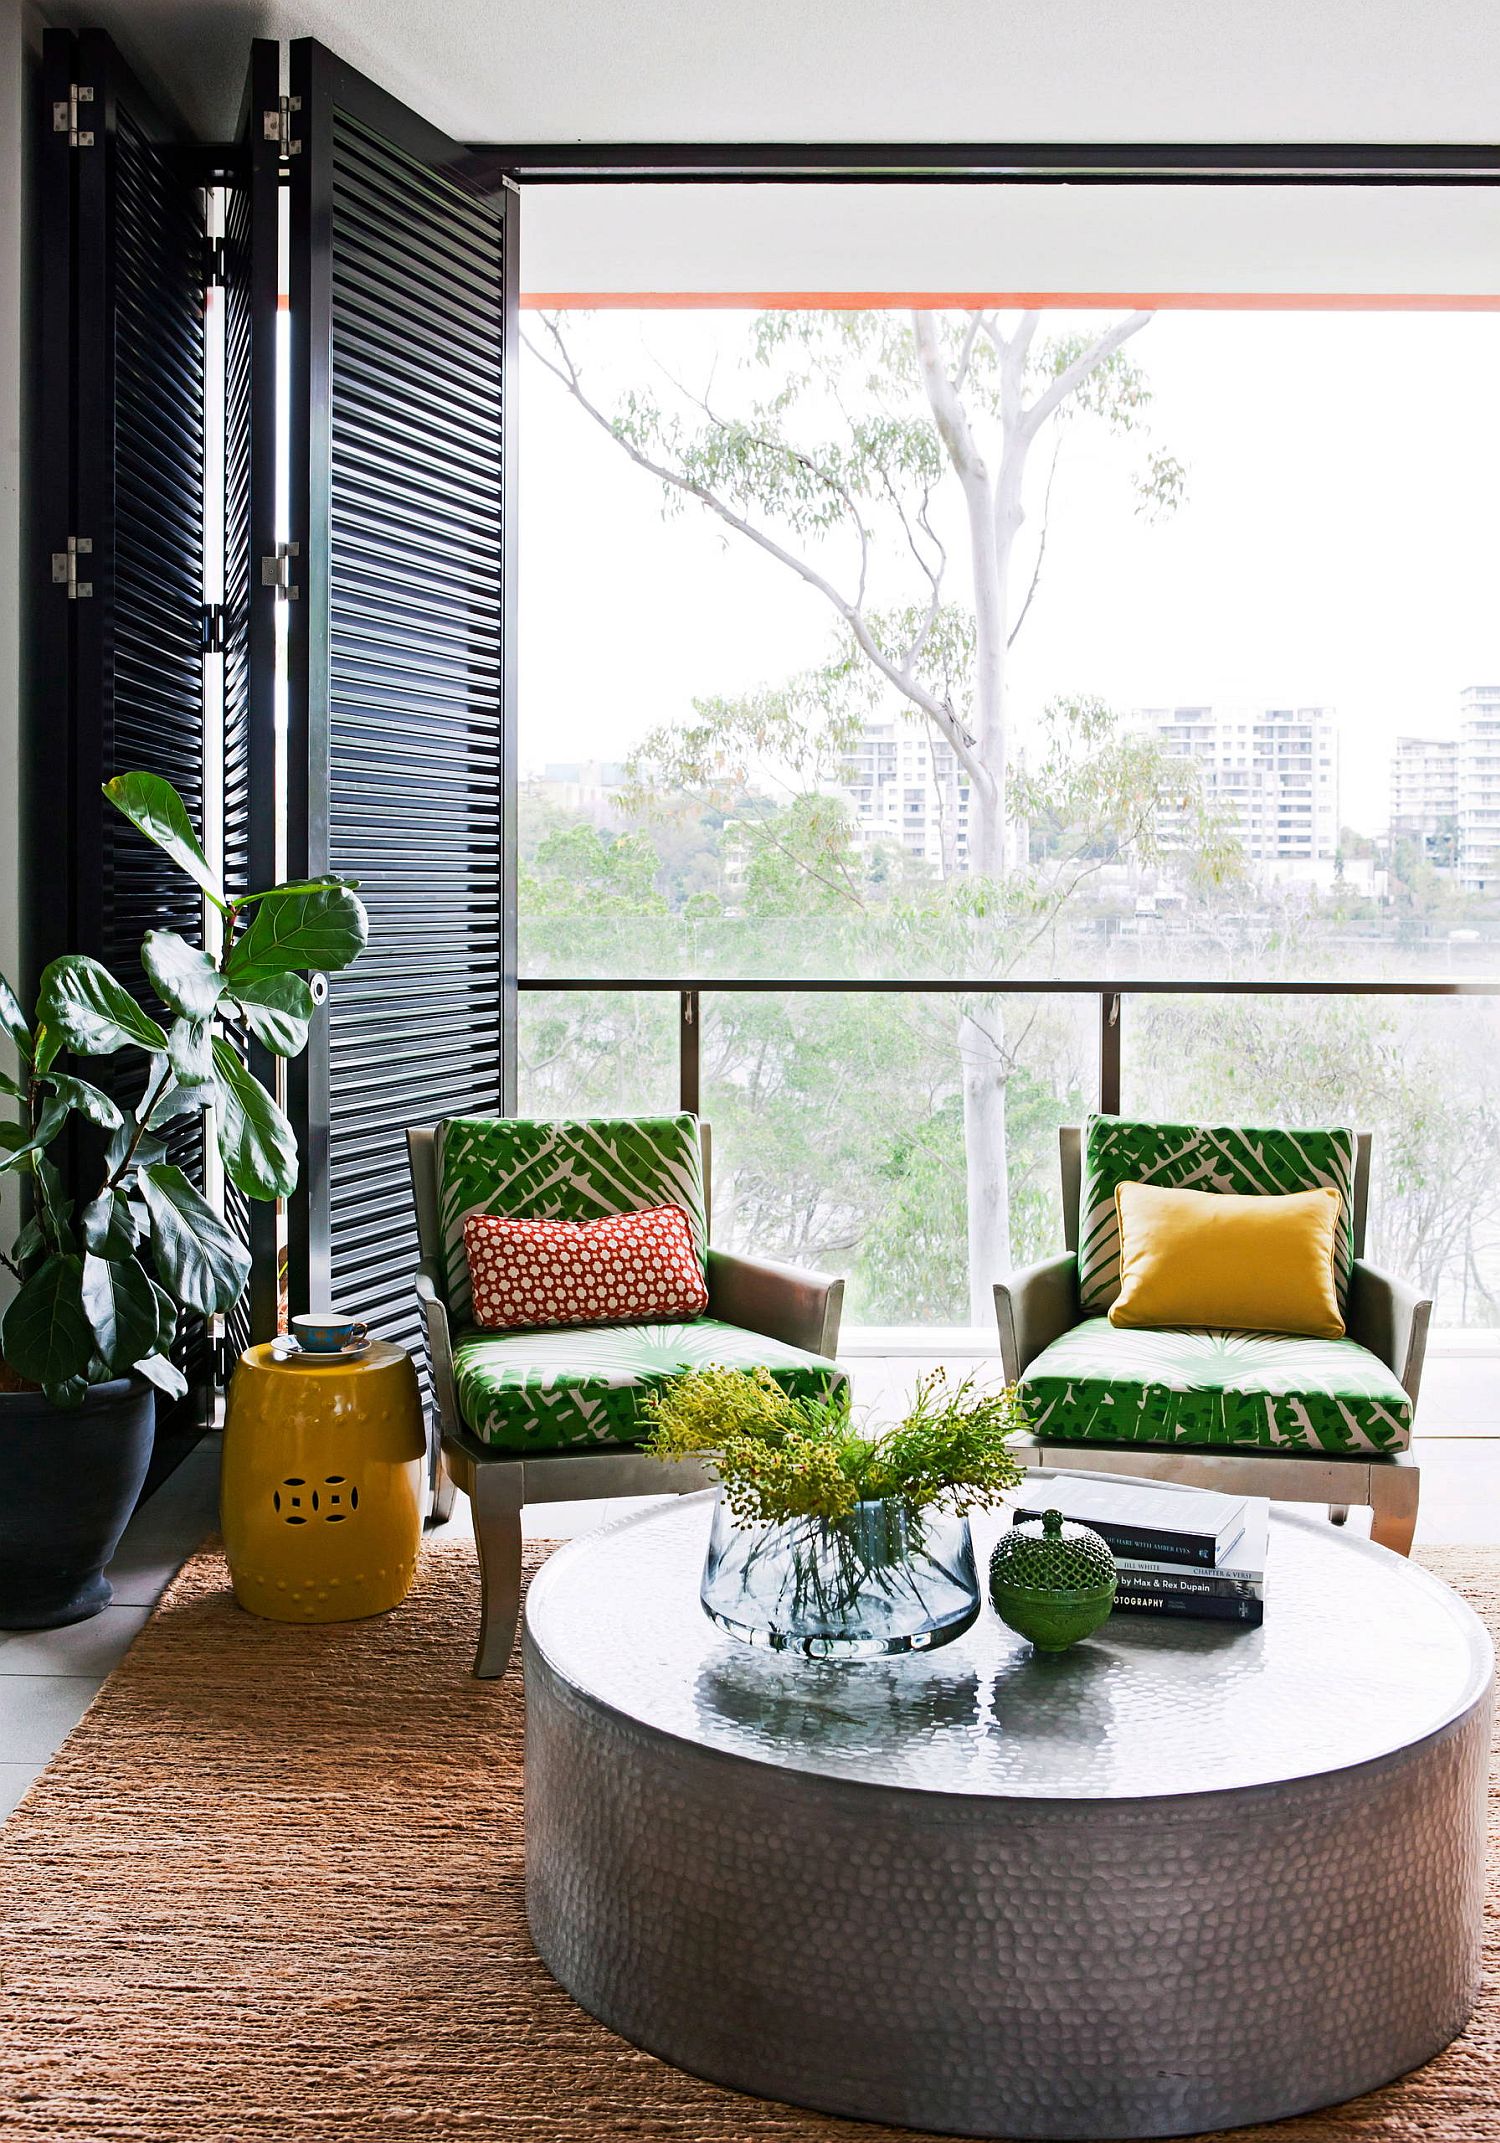 Delightful-use-of-green-and-yellow-accents-in-the-living-room